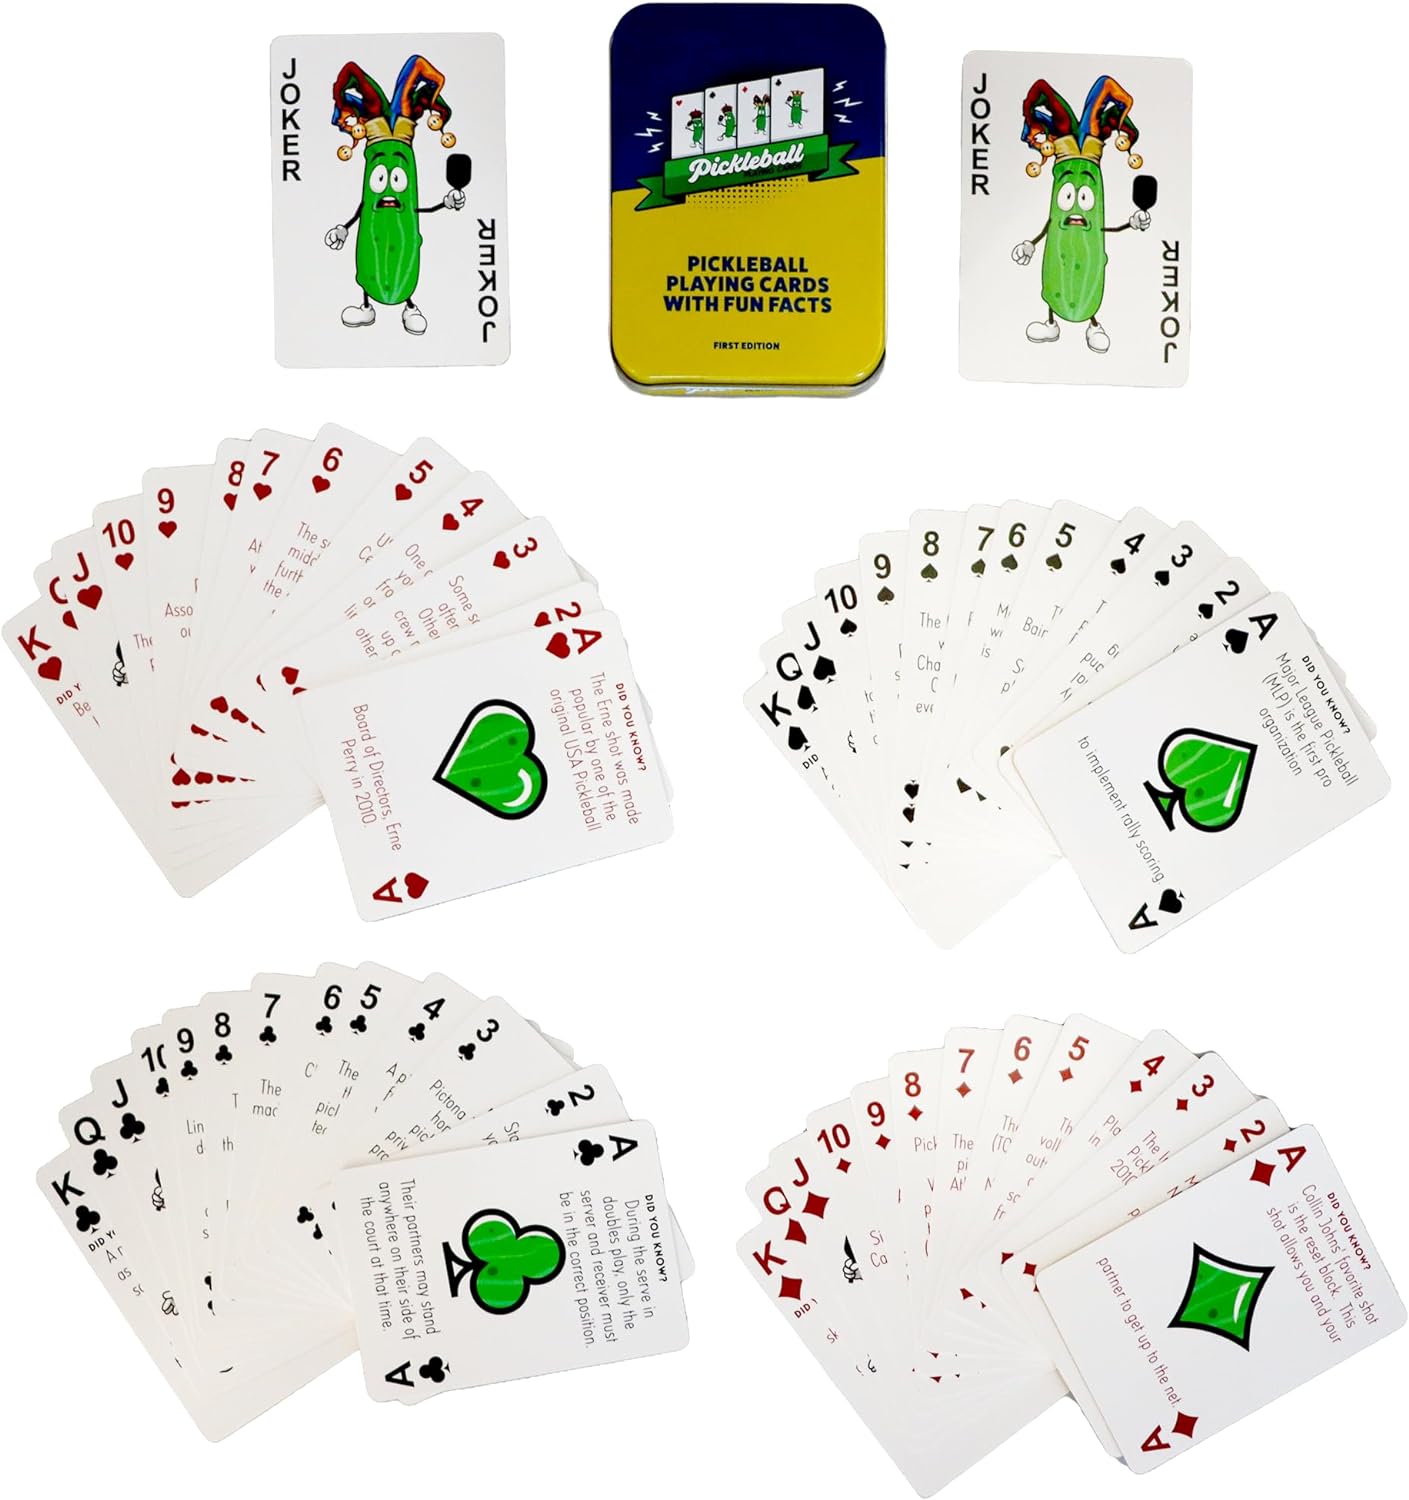 Pickleball Playing Cards with Fun Pickleball Facts